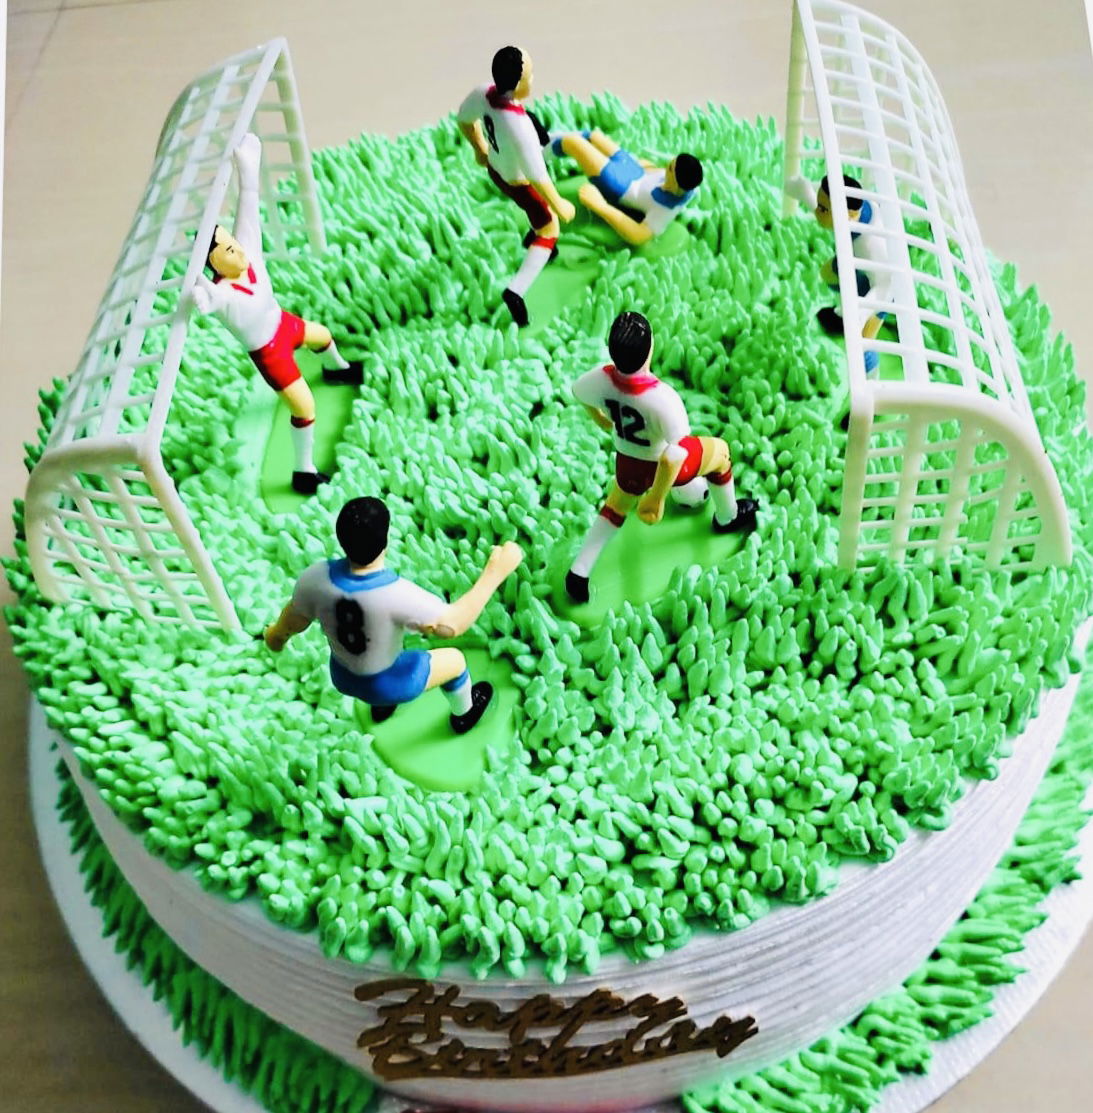 2 Layer Vanilla Soccer Cake with Buttercream Frosting